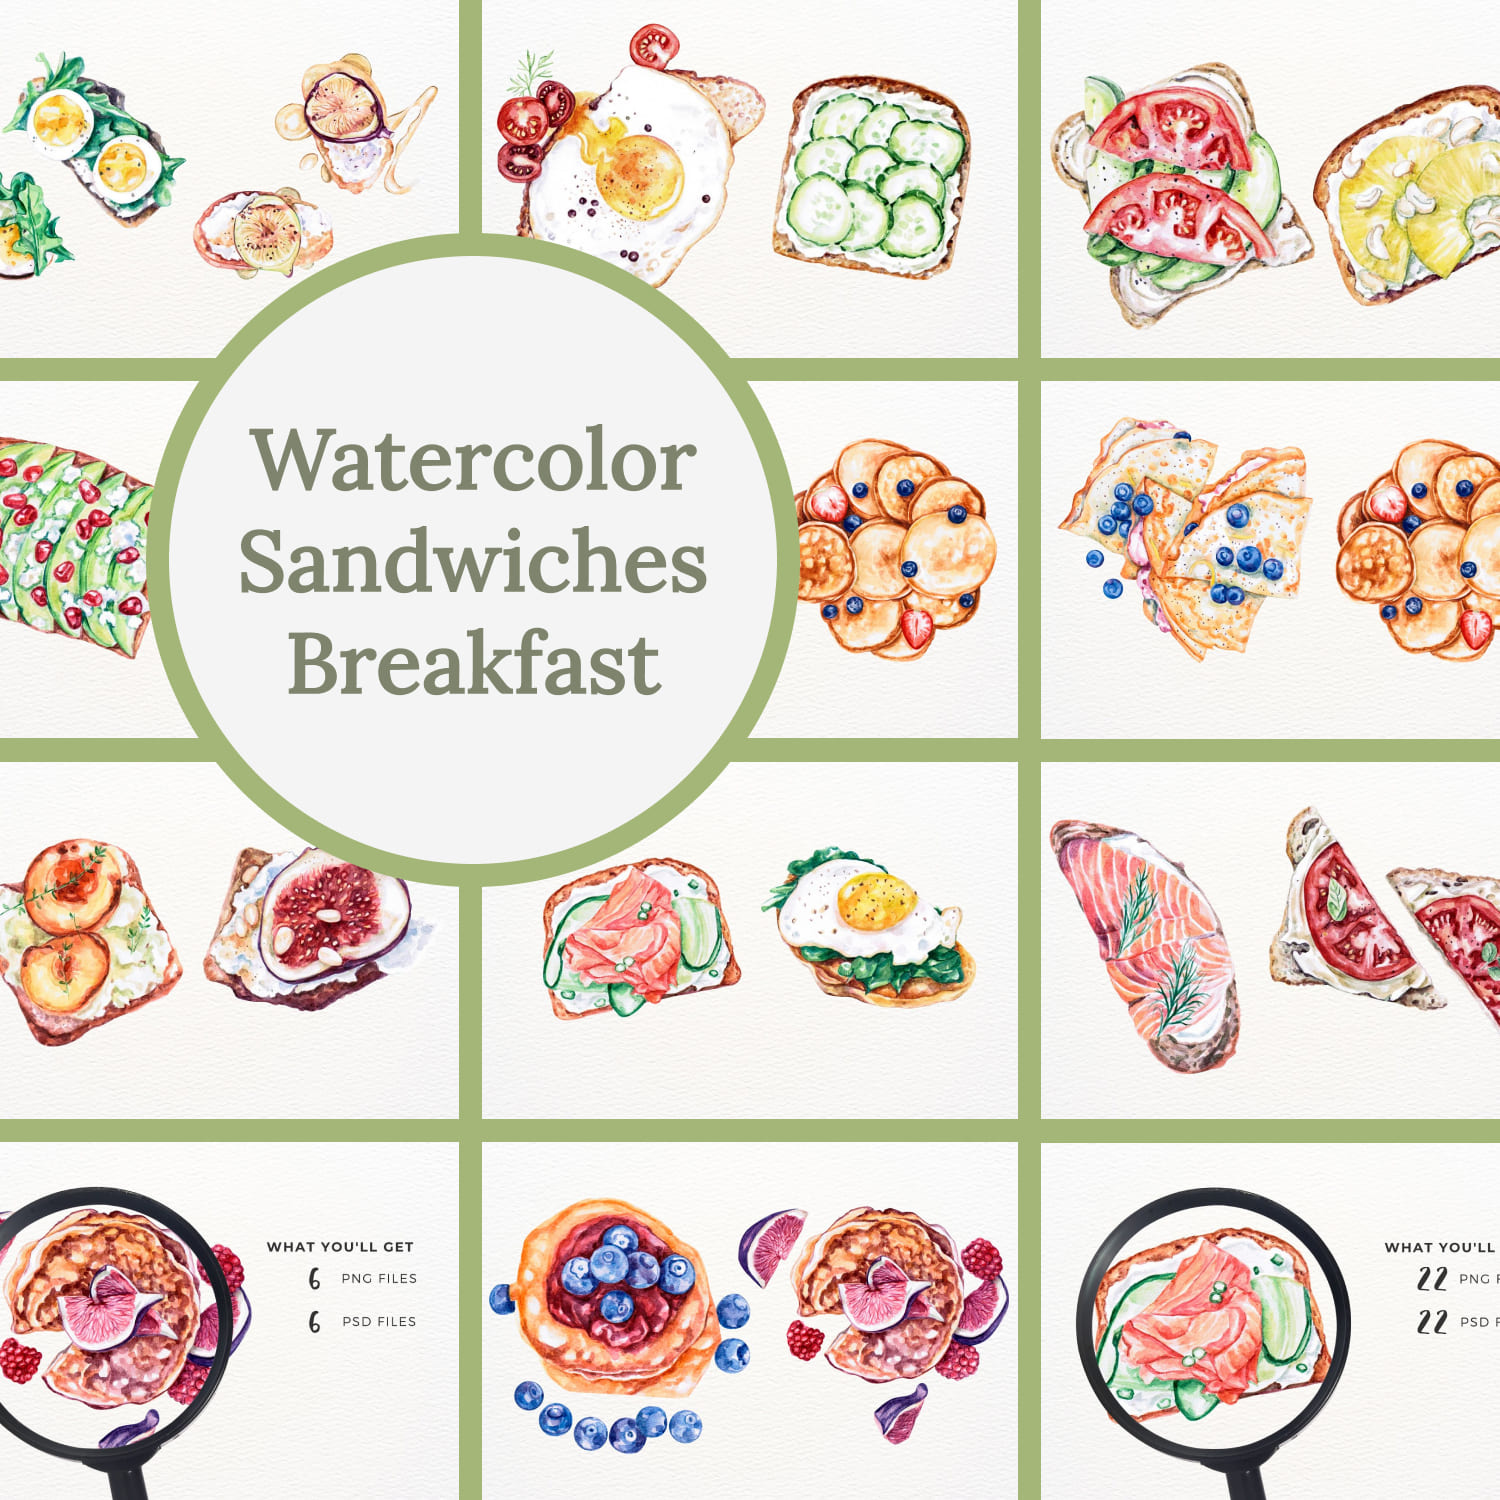 Watercolor sandwiches breakfast - main image preview.